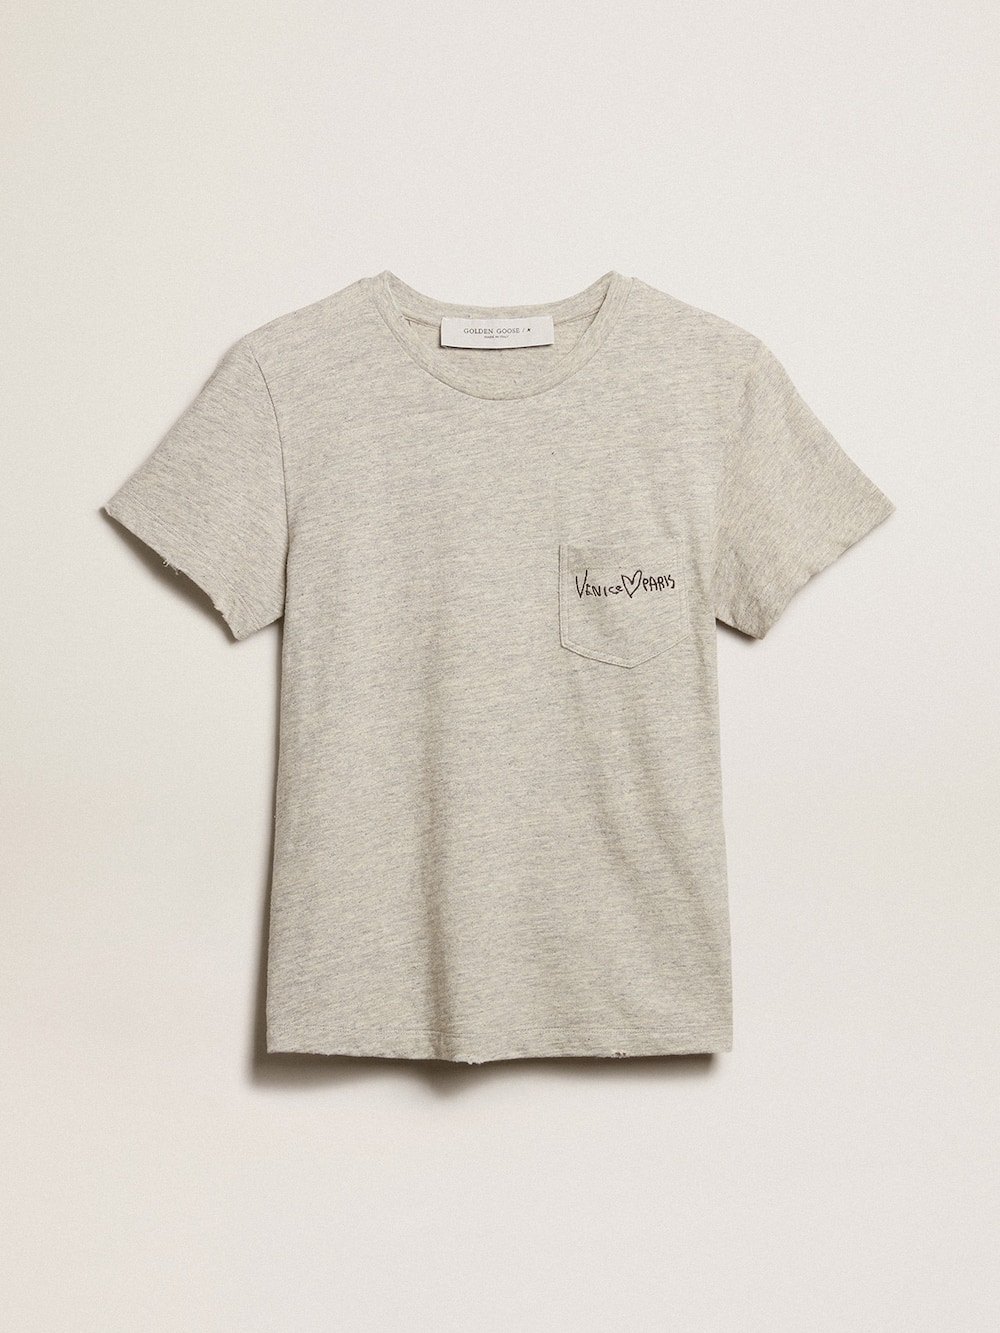 Golden Goose - Women’s gray melange cotton T-shirt with embroidered lettering in 